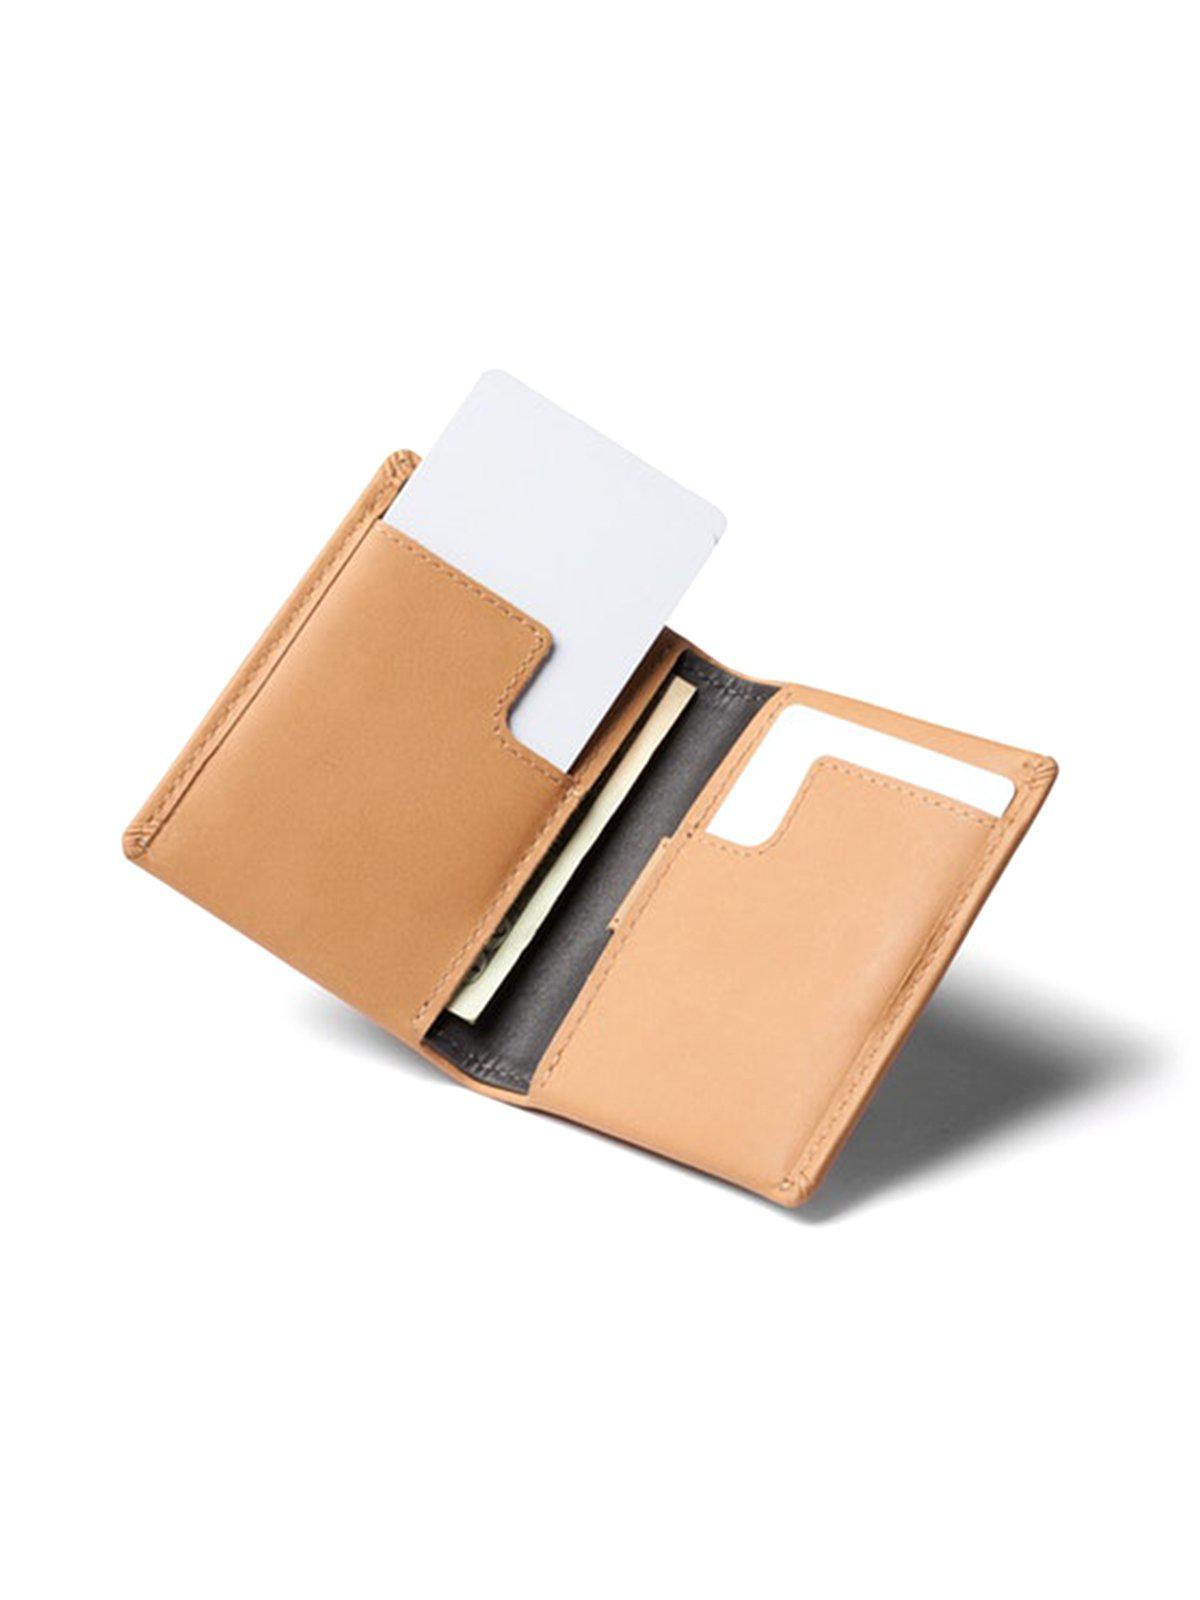 Bellroy Slim Sleeve Wallet Tan - MORE by Morello Indonesia